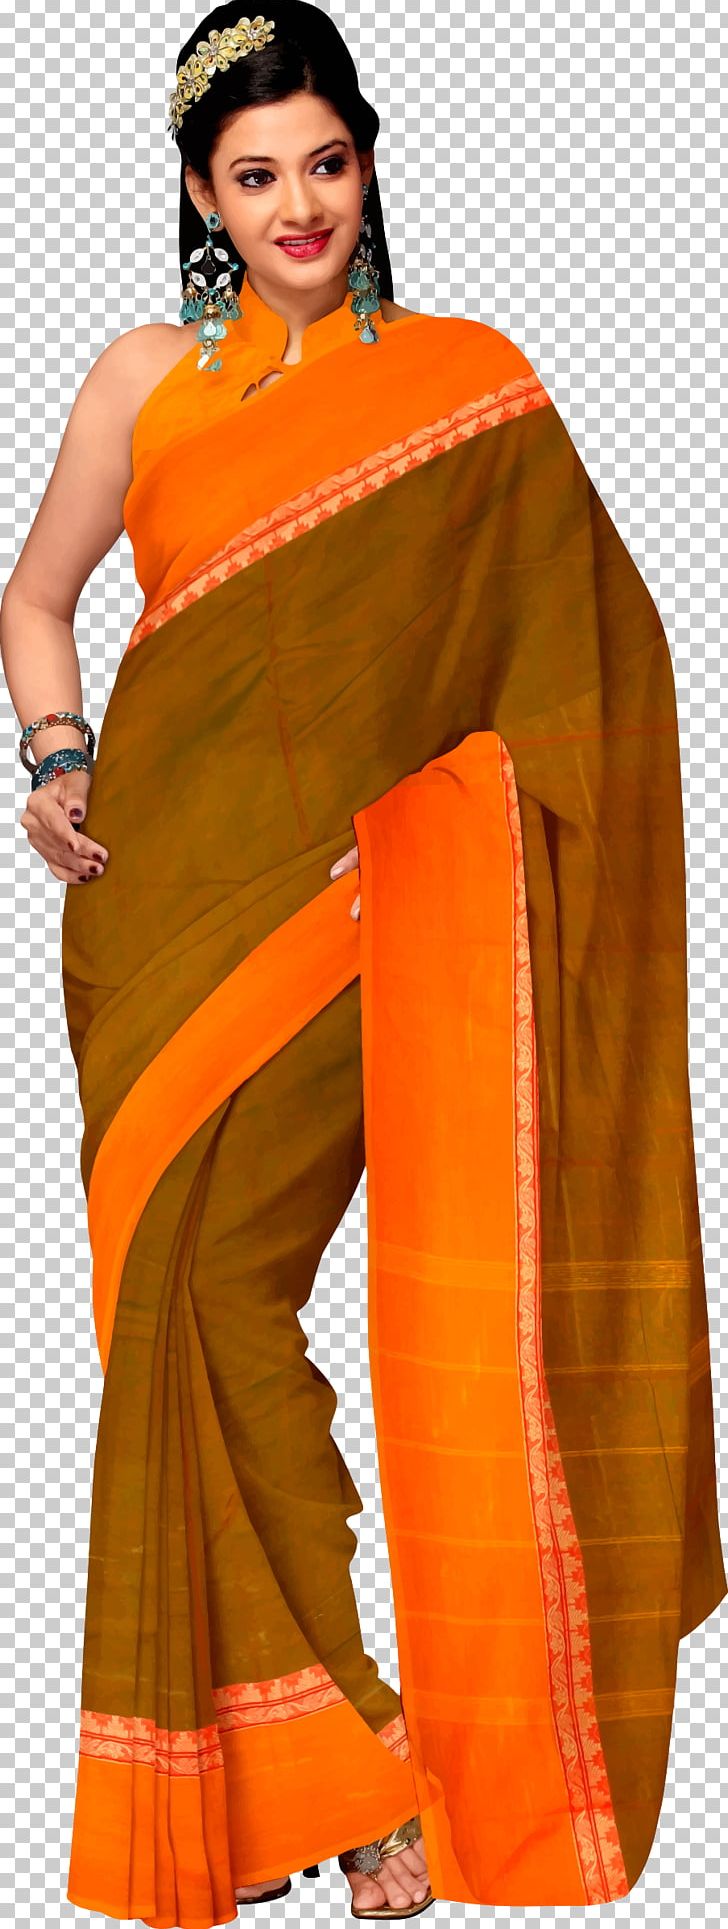 Sari Clothing Paithani Woman PNG, Clipart, Abdomen, Clothing, Clothing In India, Costume, Culture Free PNG Download